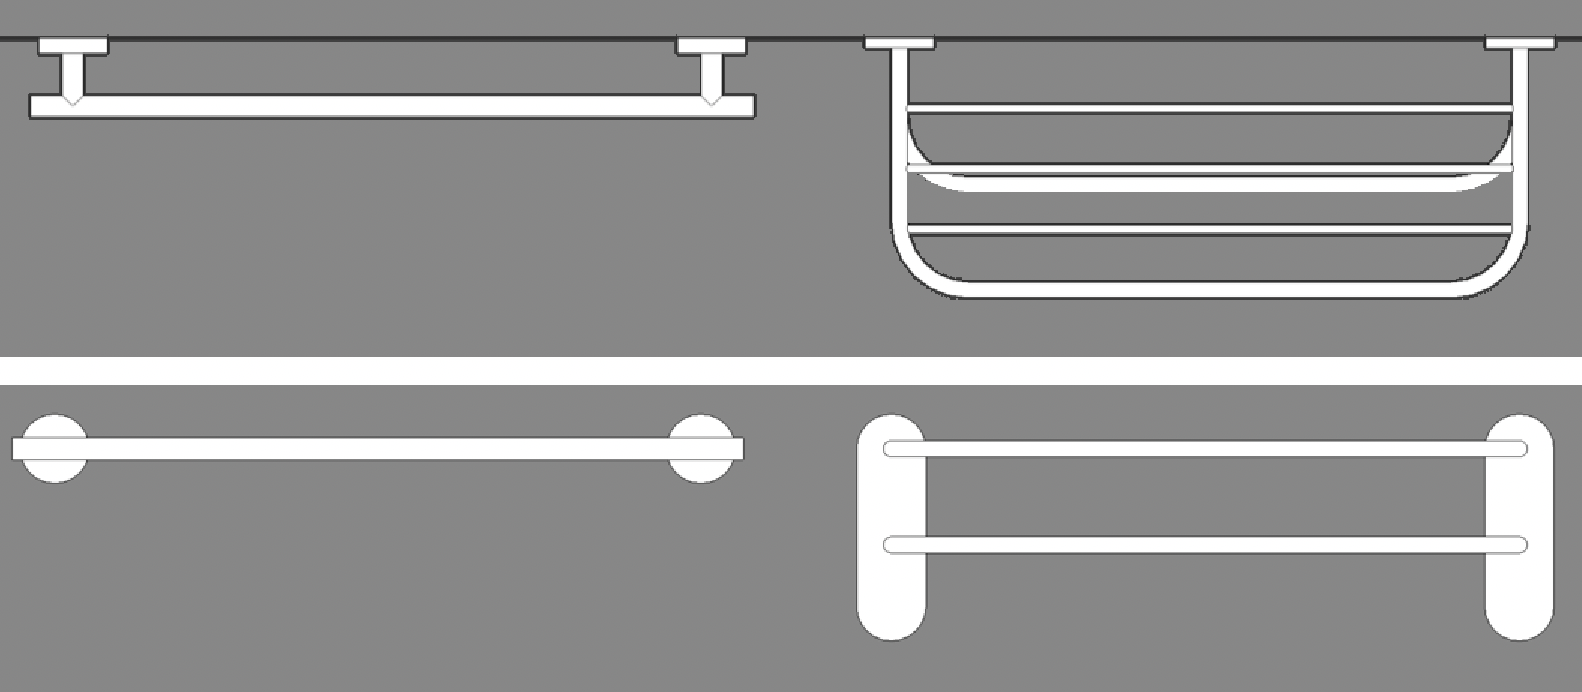 Towel rack and rails in plan and elevation with 2D geometry.